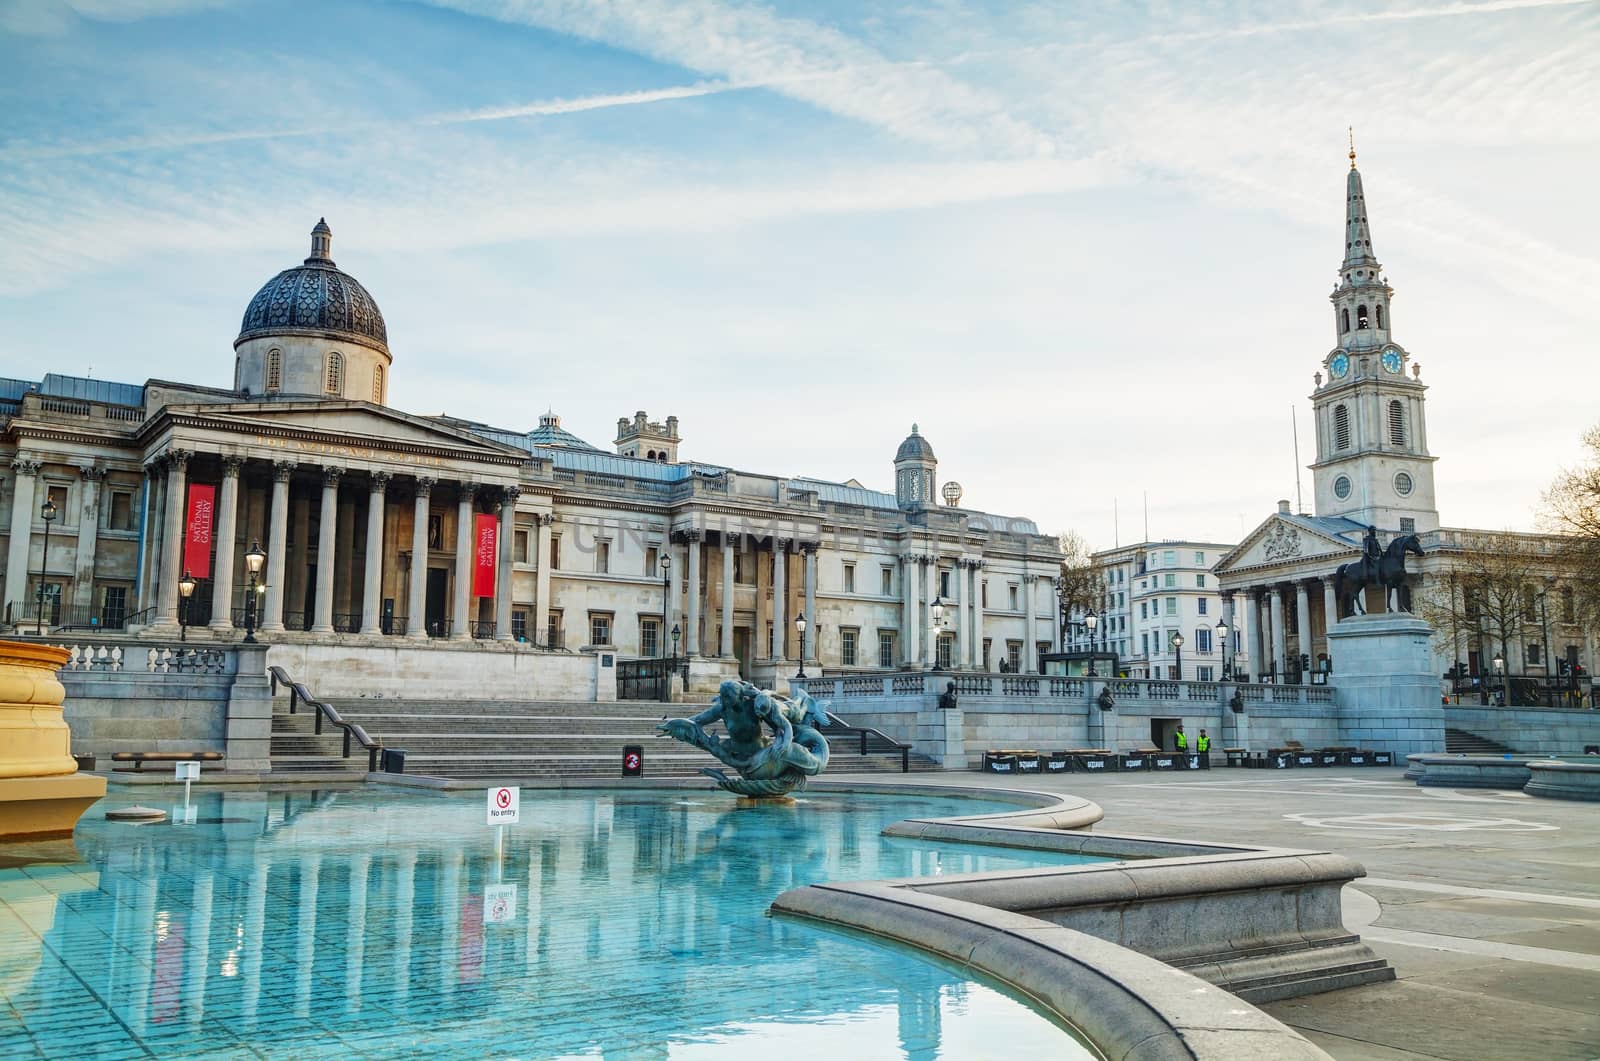 LONDON - APRIL 12: National Gallery building at Trafalgar square on April 12, 2015 in London, UK. Founded in 1824, it houses a collection of over 2,300 paintings dating from the mid-13th century to 1900.